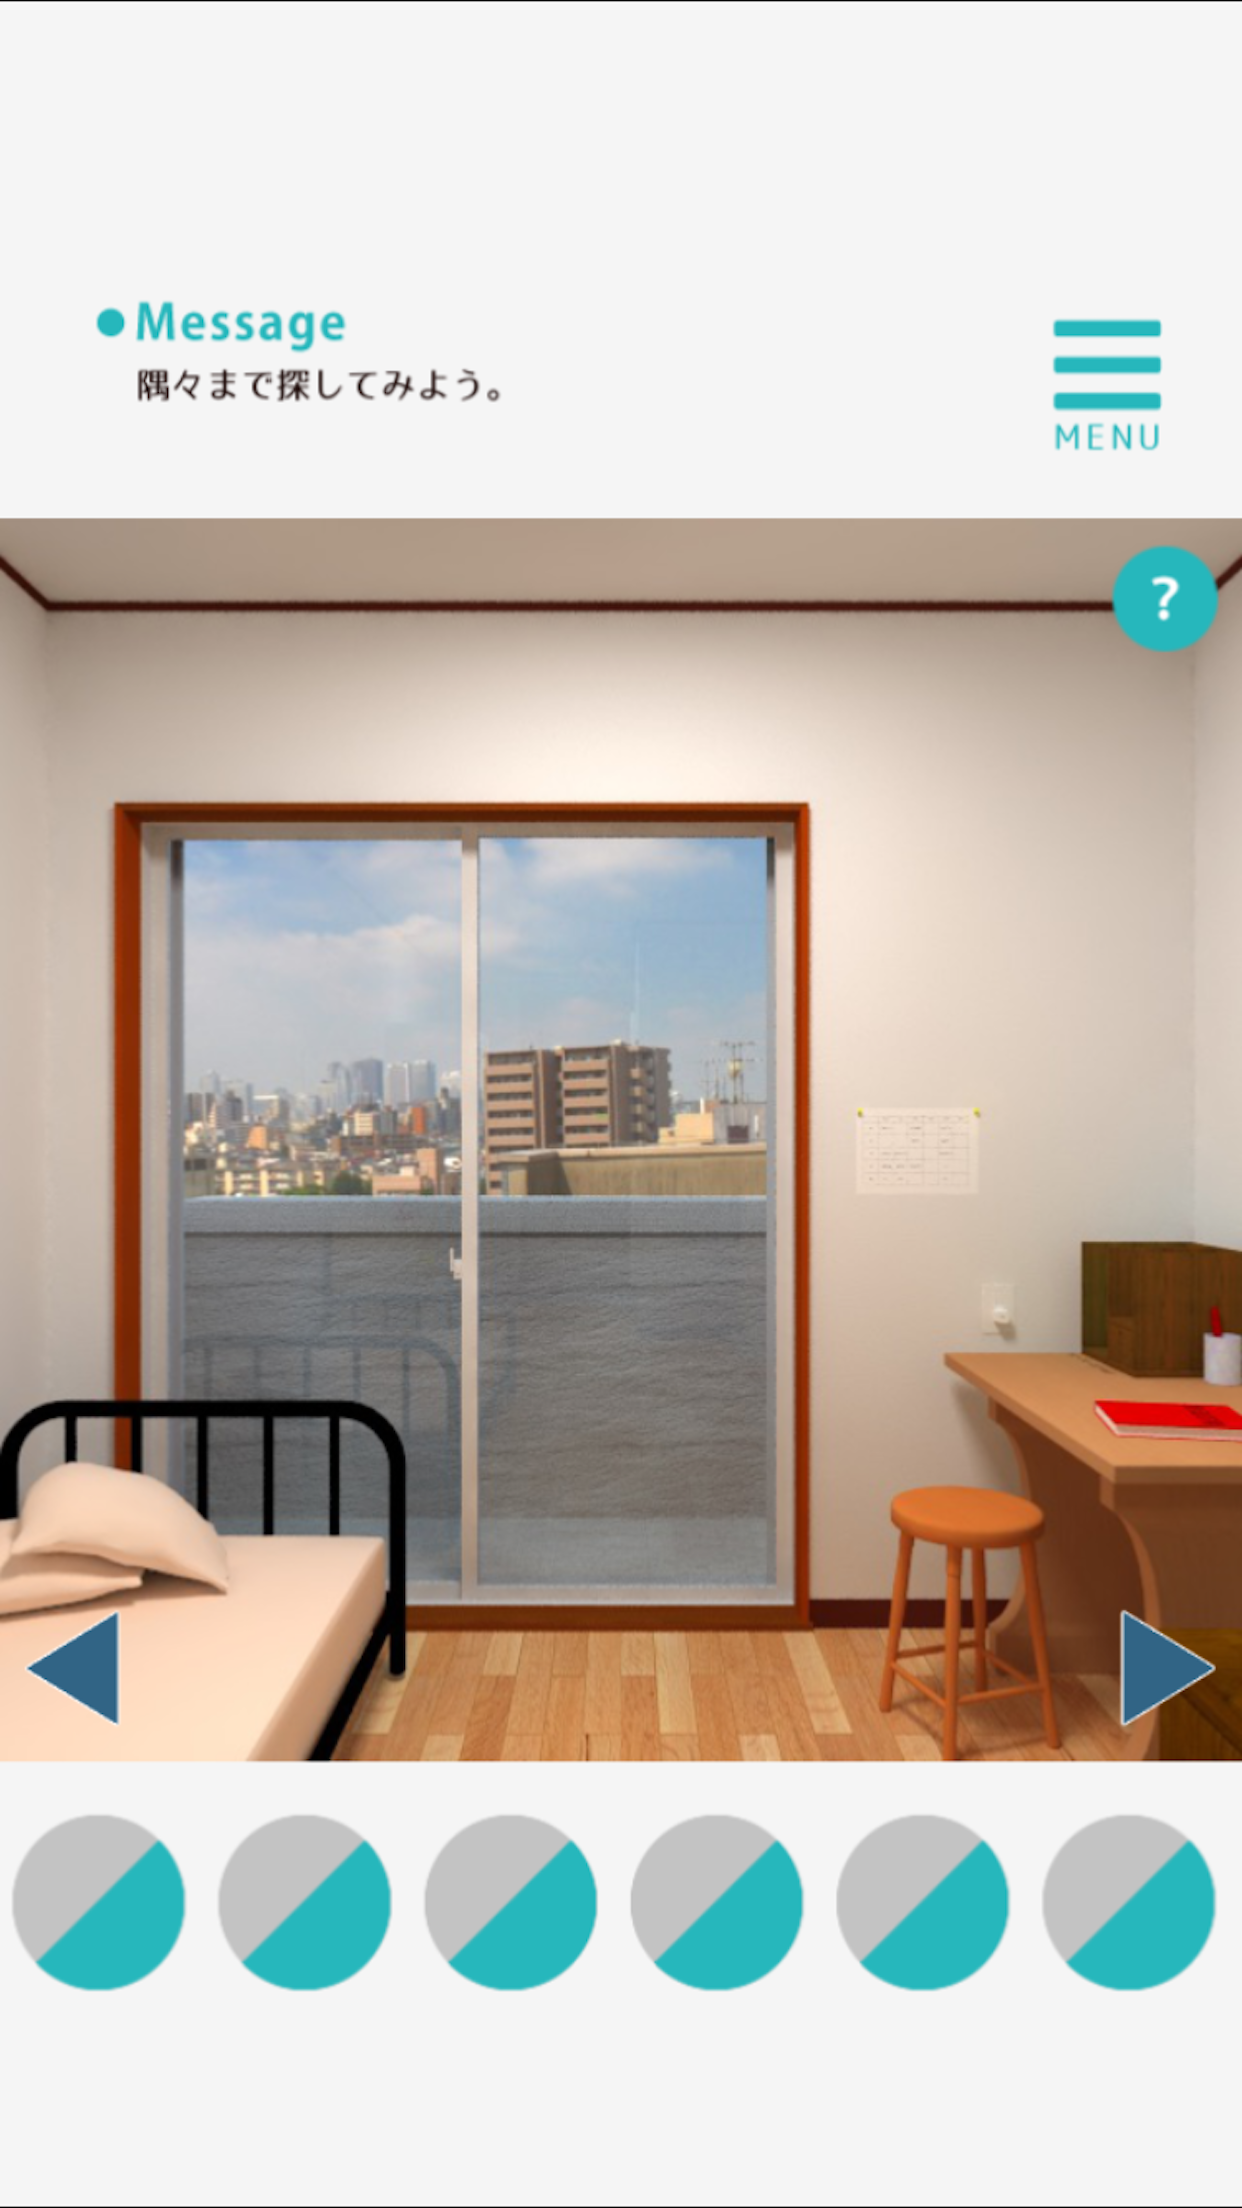 Download One Room VR - Uniform Edition APK 1.2.0 by Gugenka Inc. - Free  Entertainment Android Apps